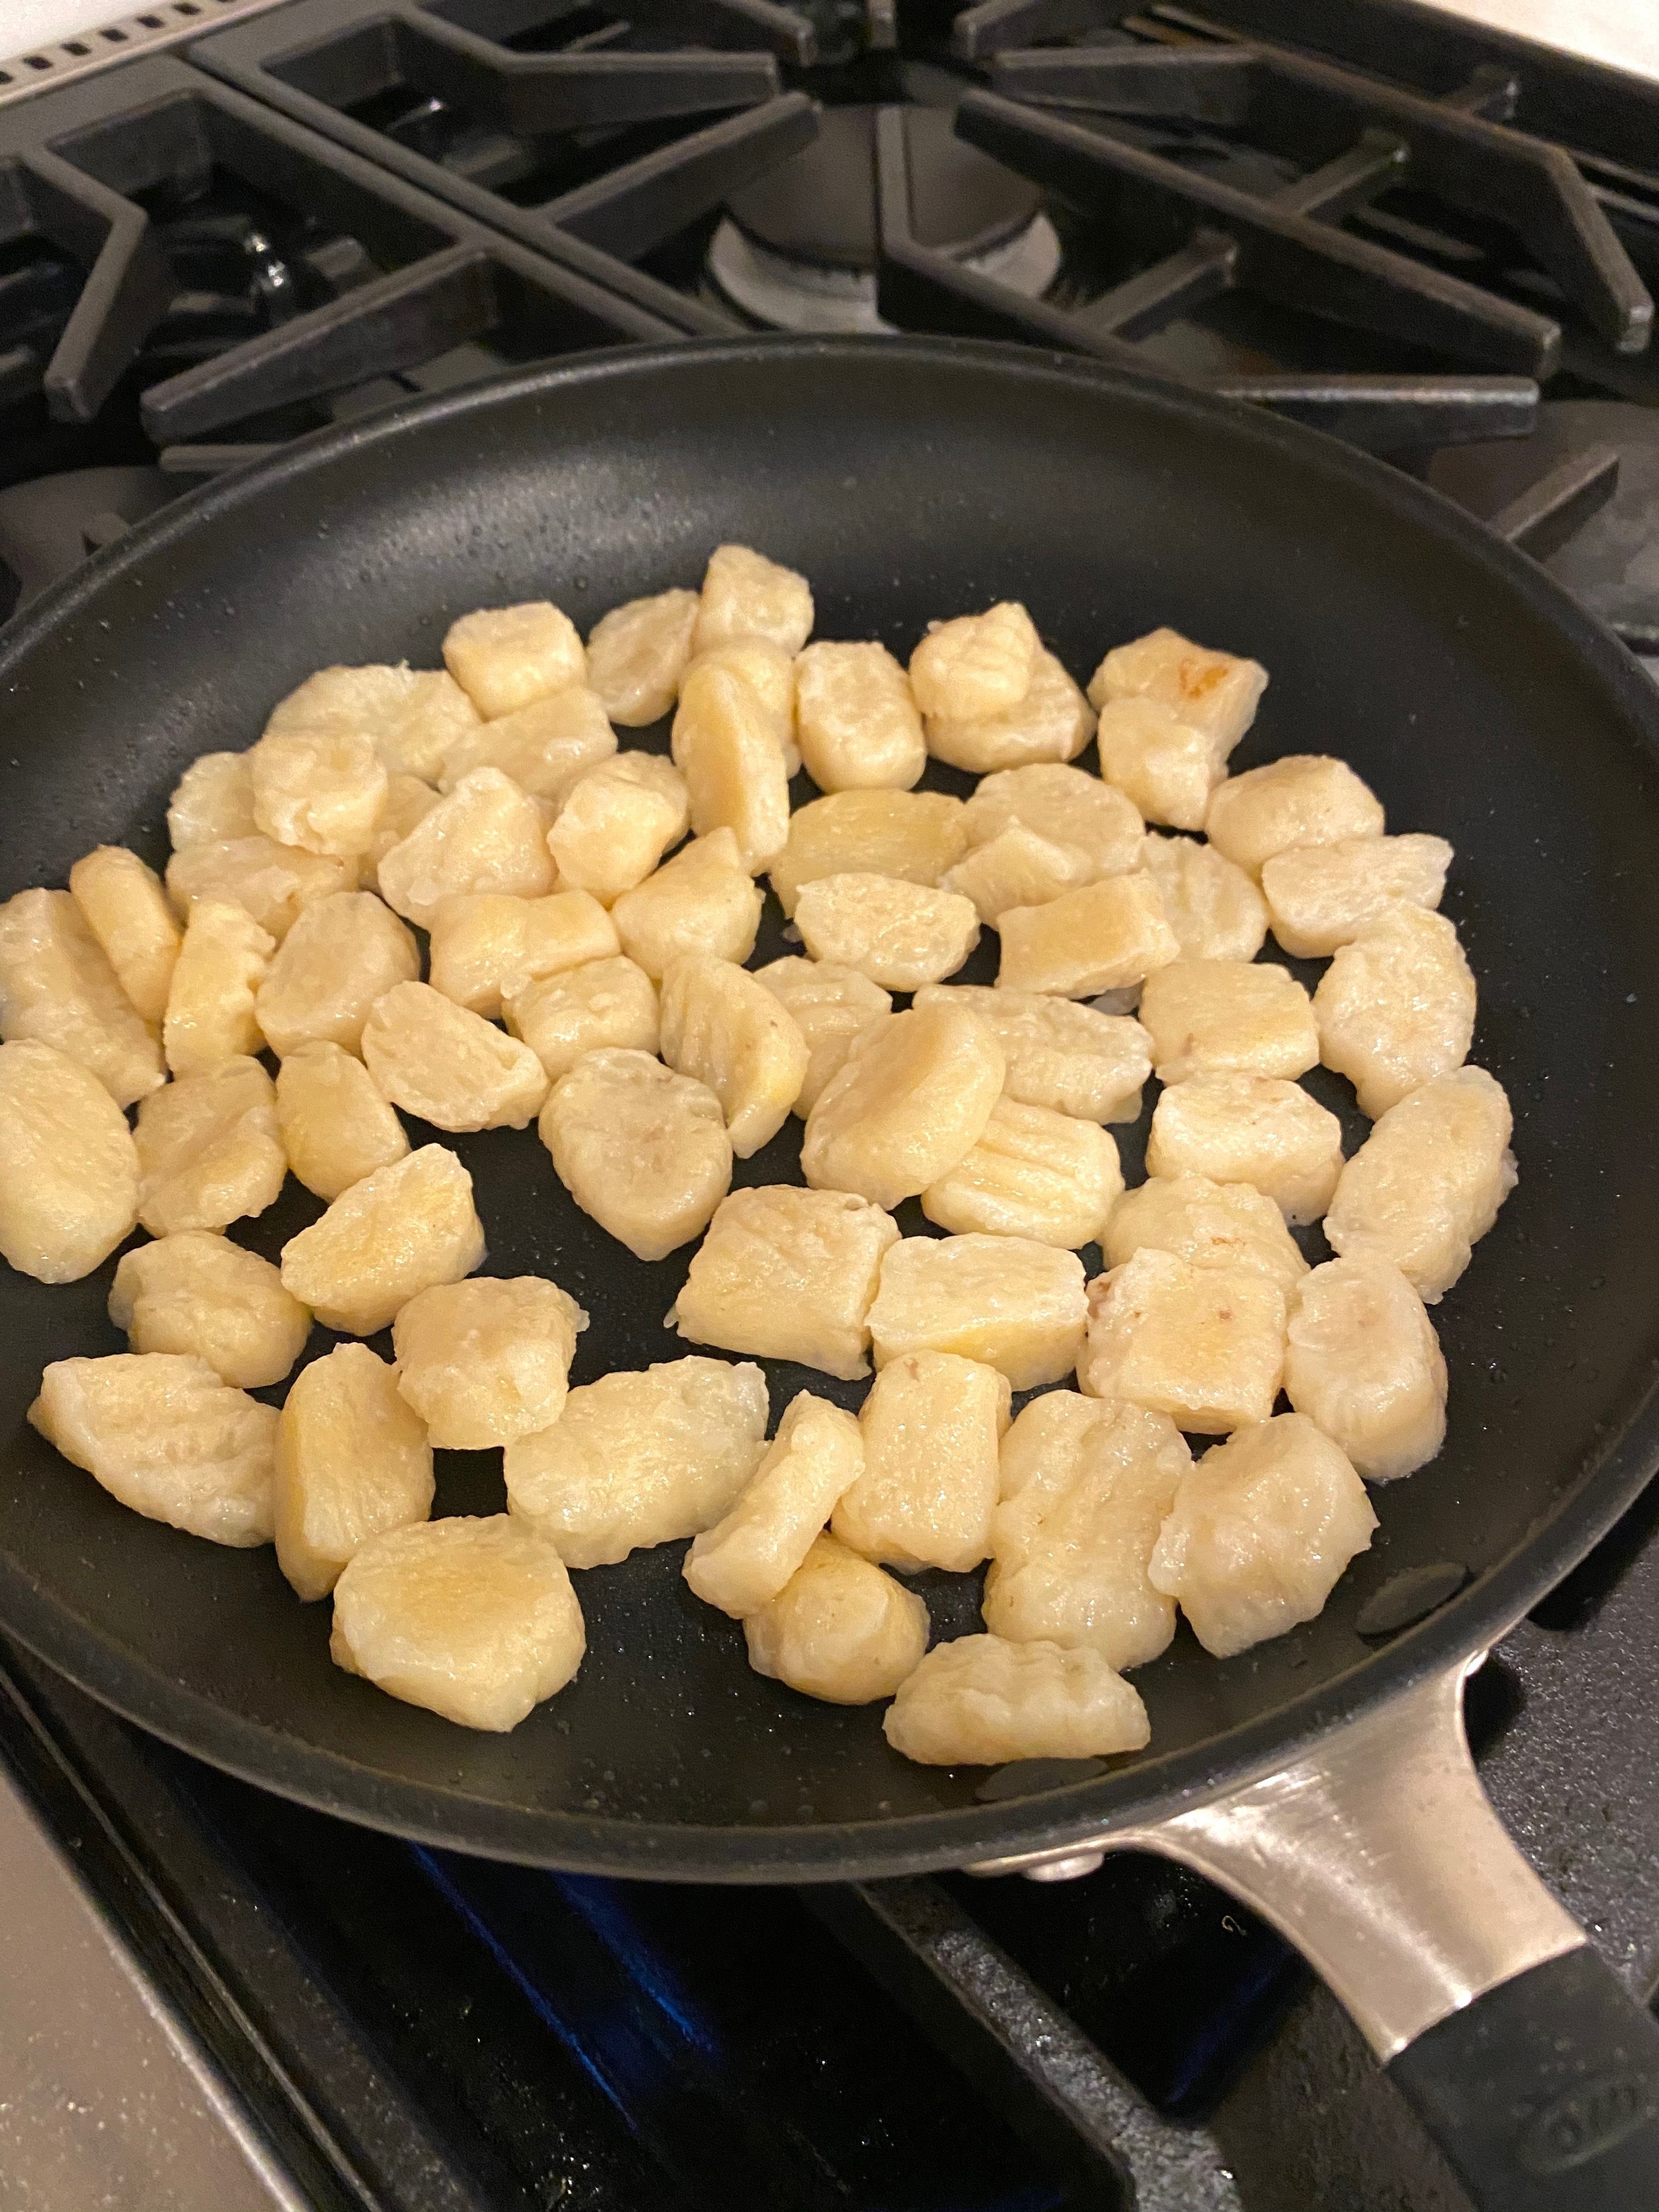 Homemade gnocchi in a skillet.